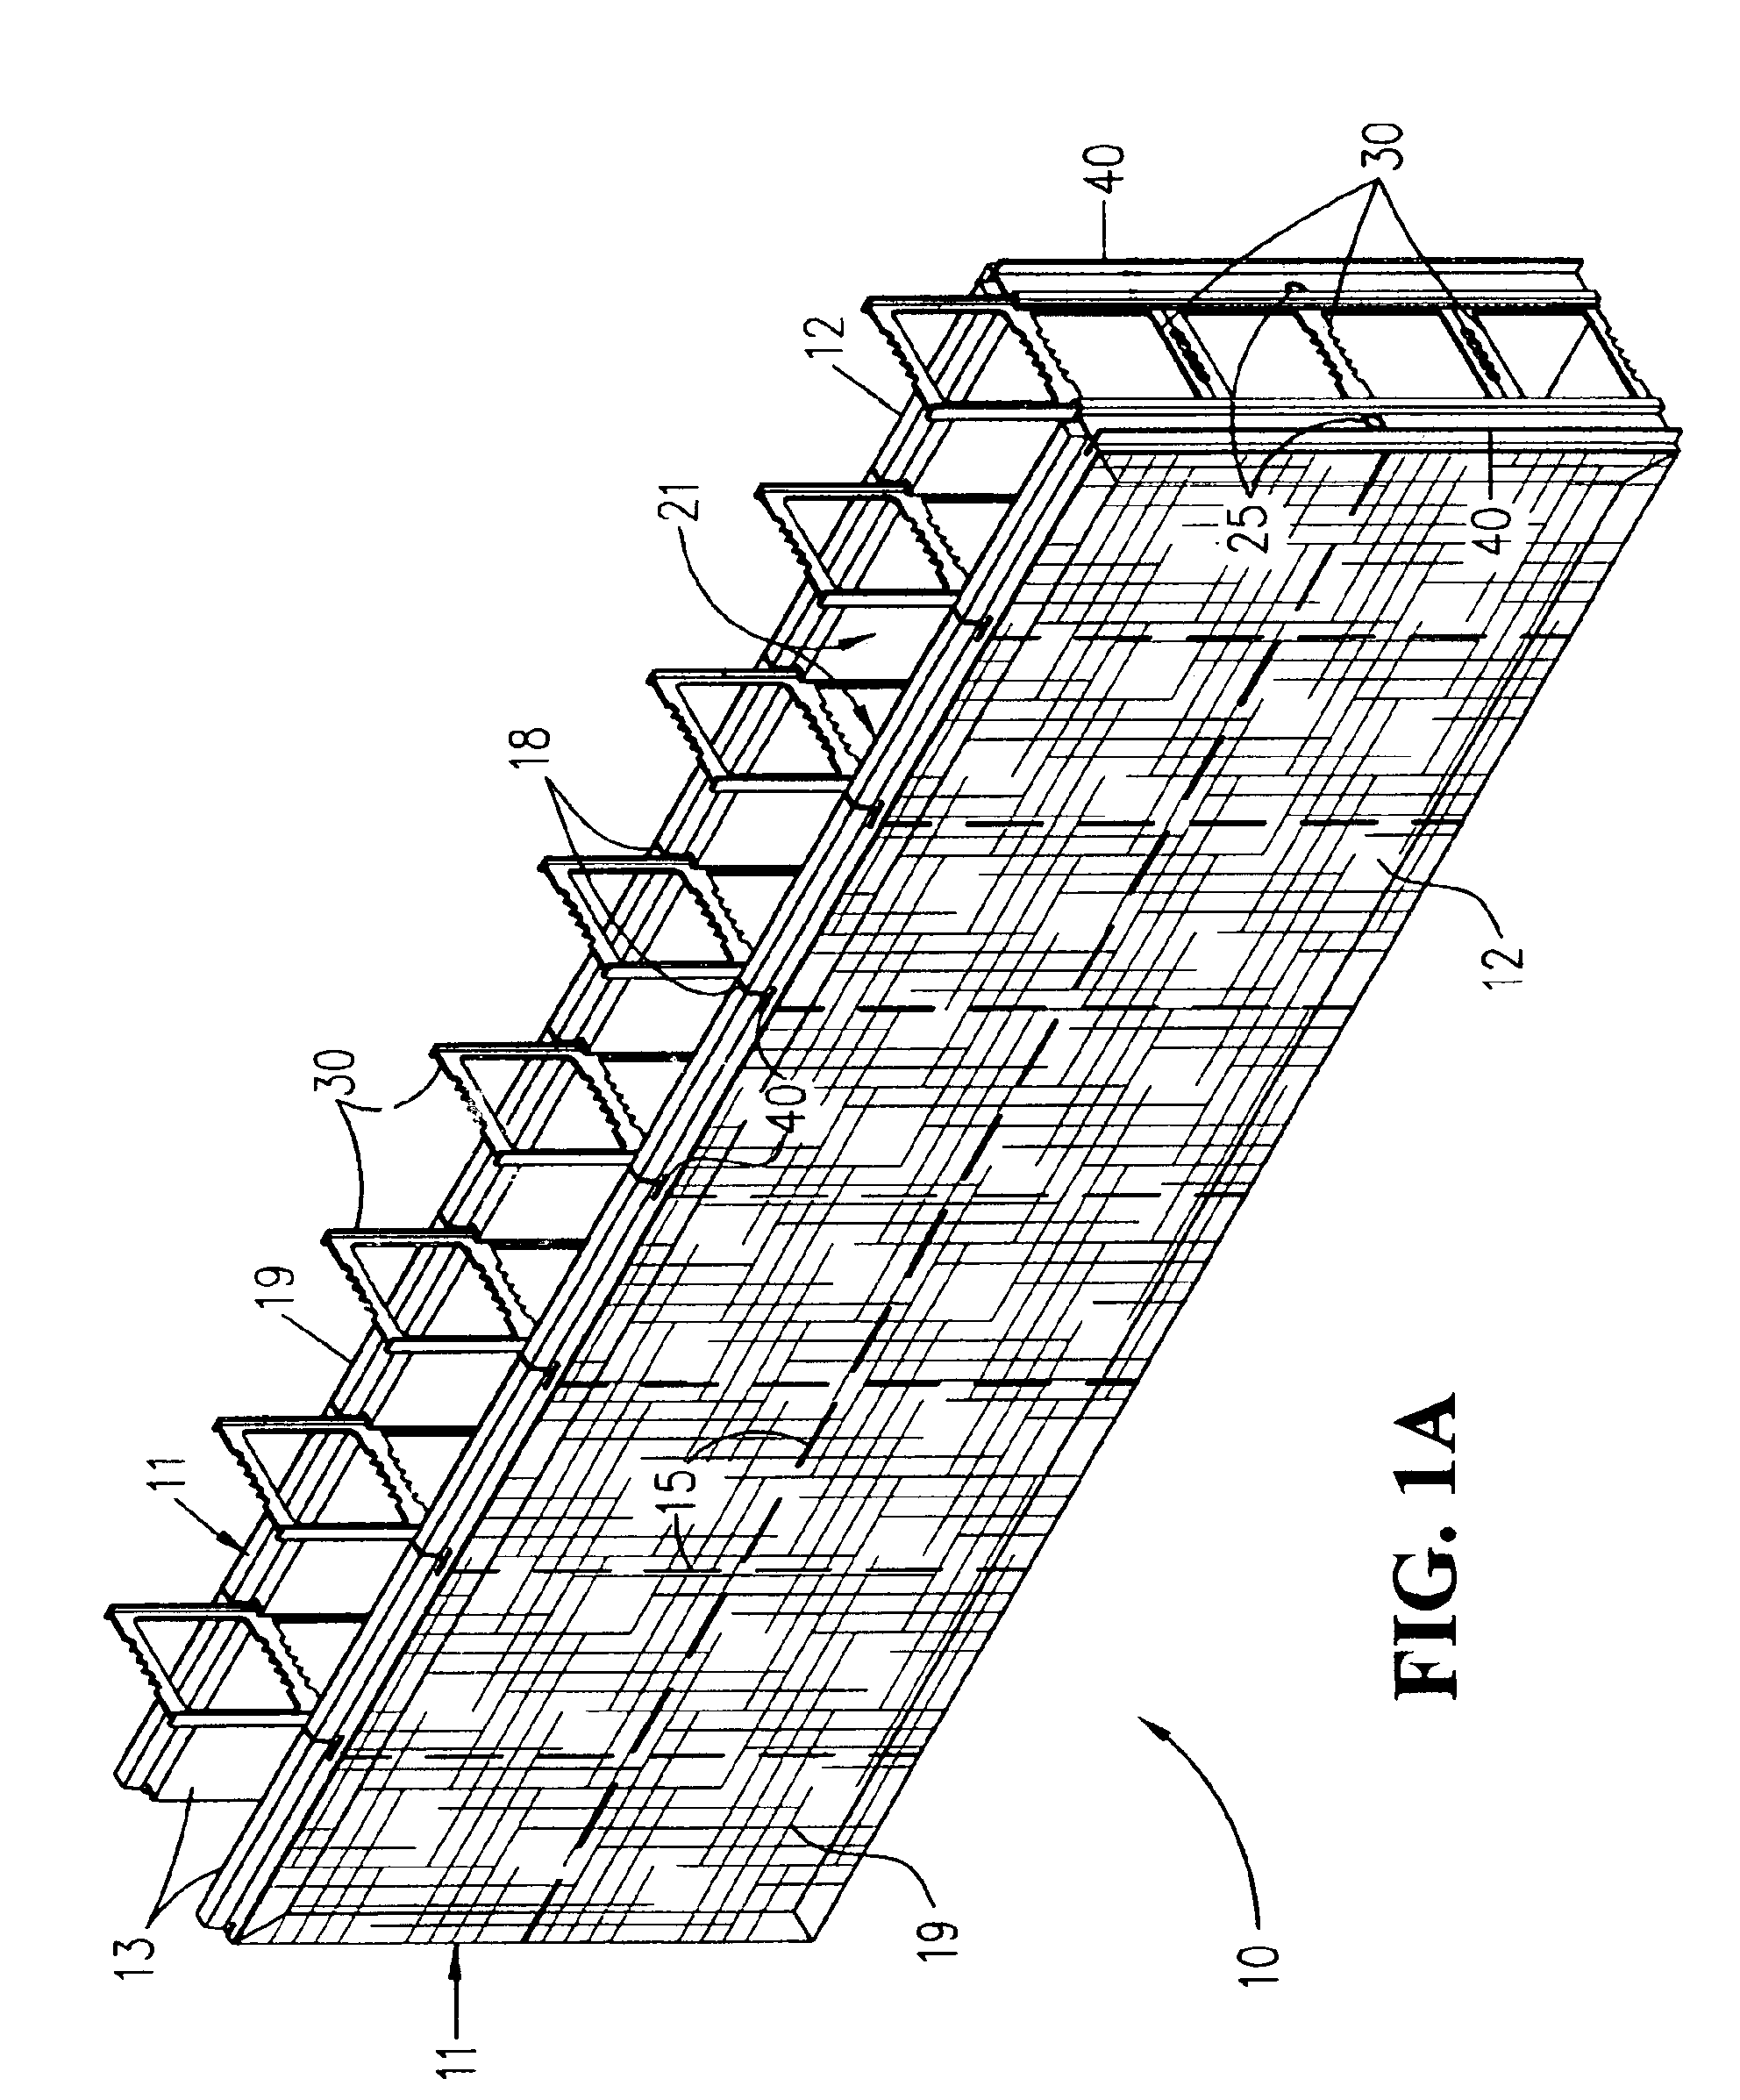 Reinforced composite system for constructing insulated concrete structures